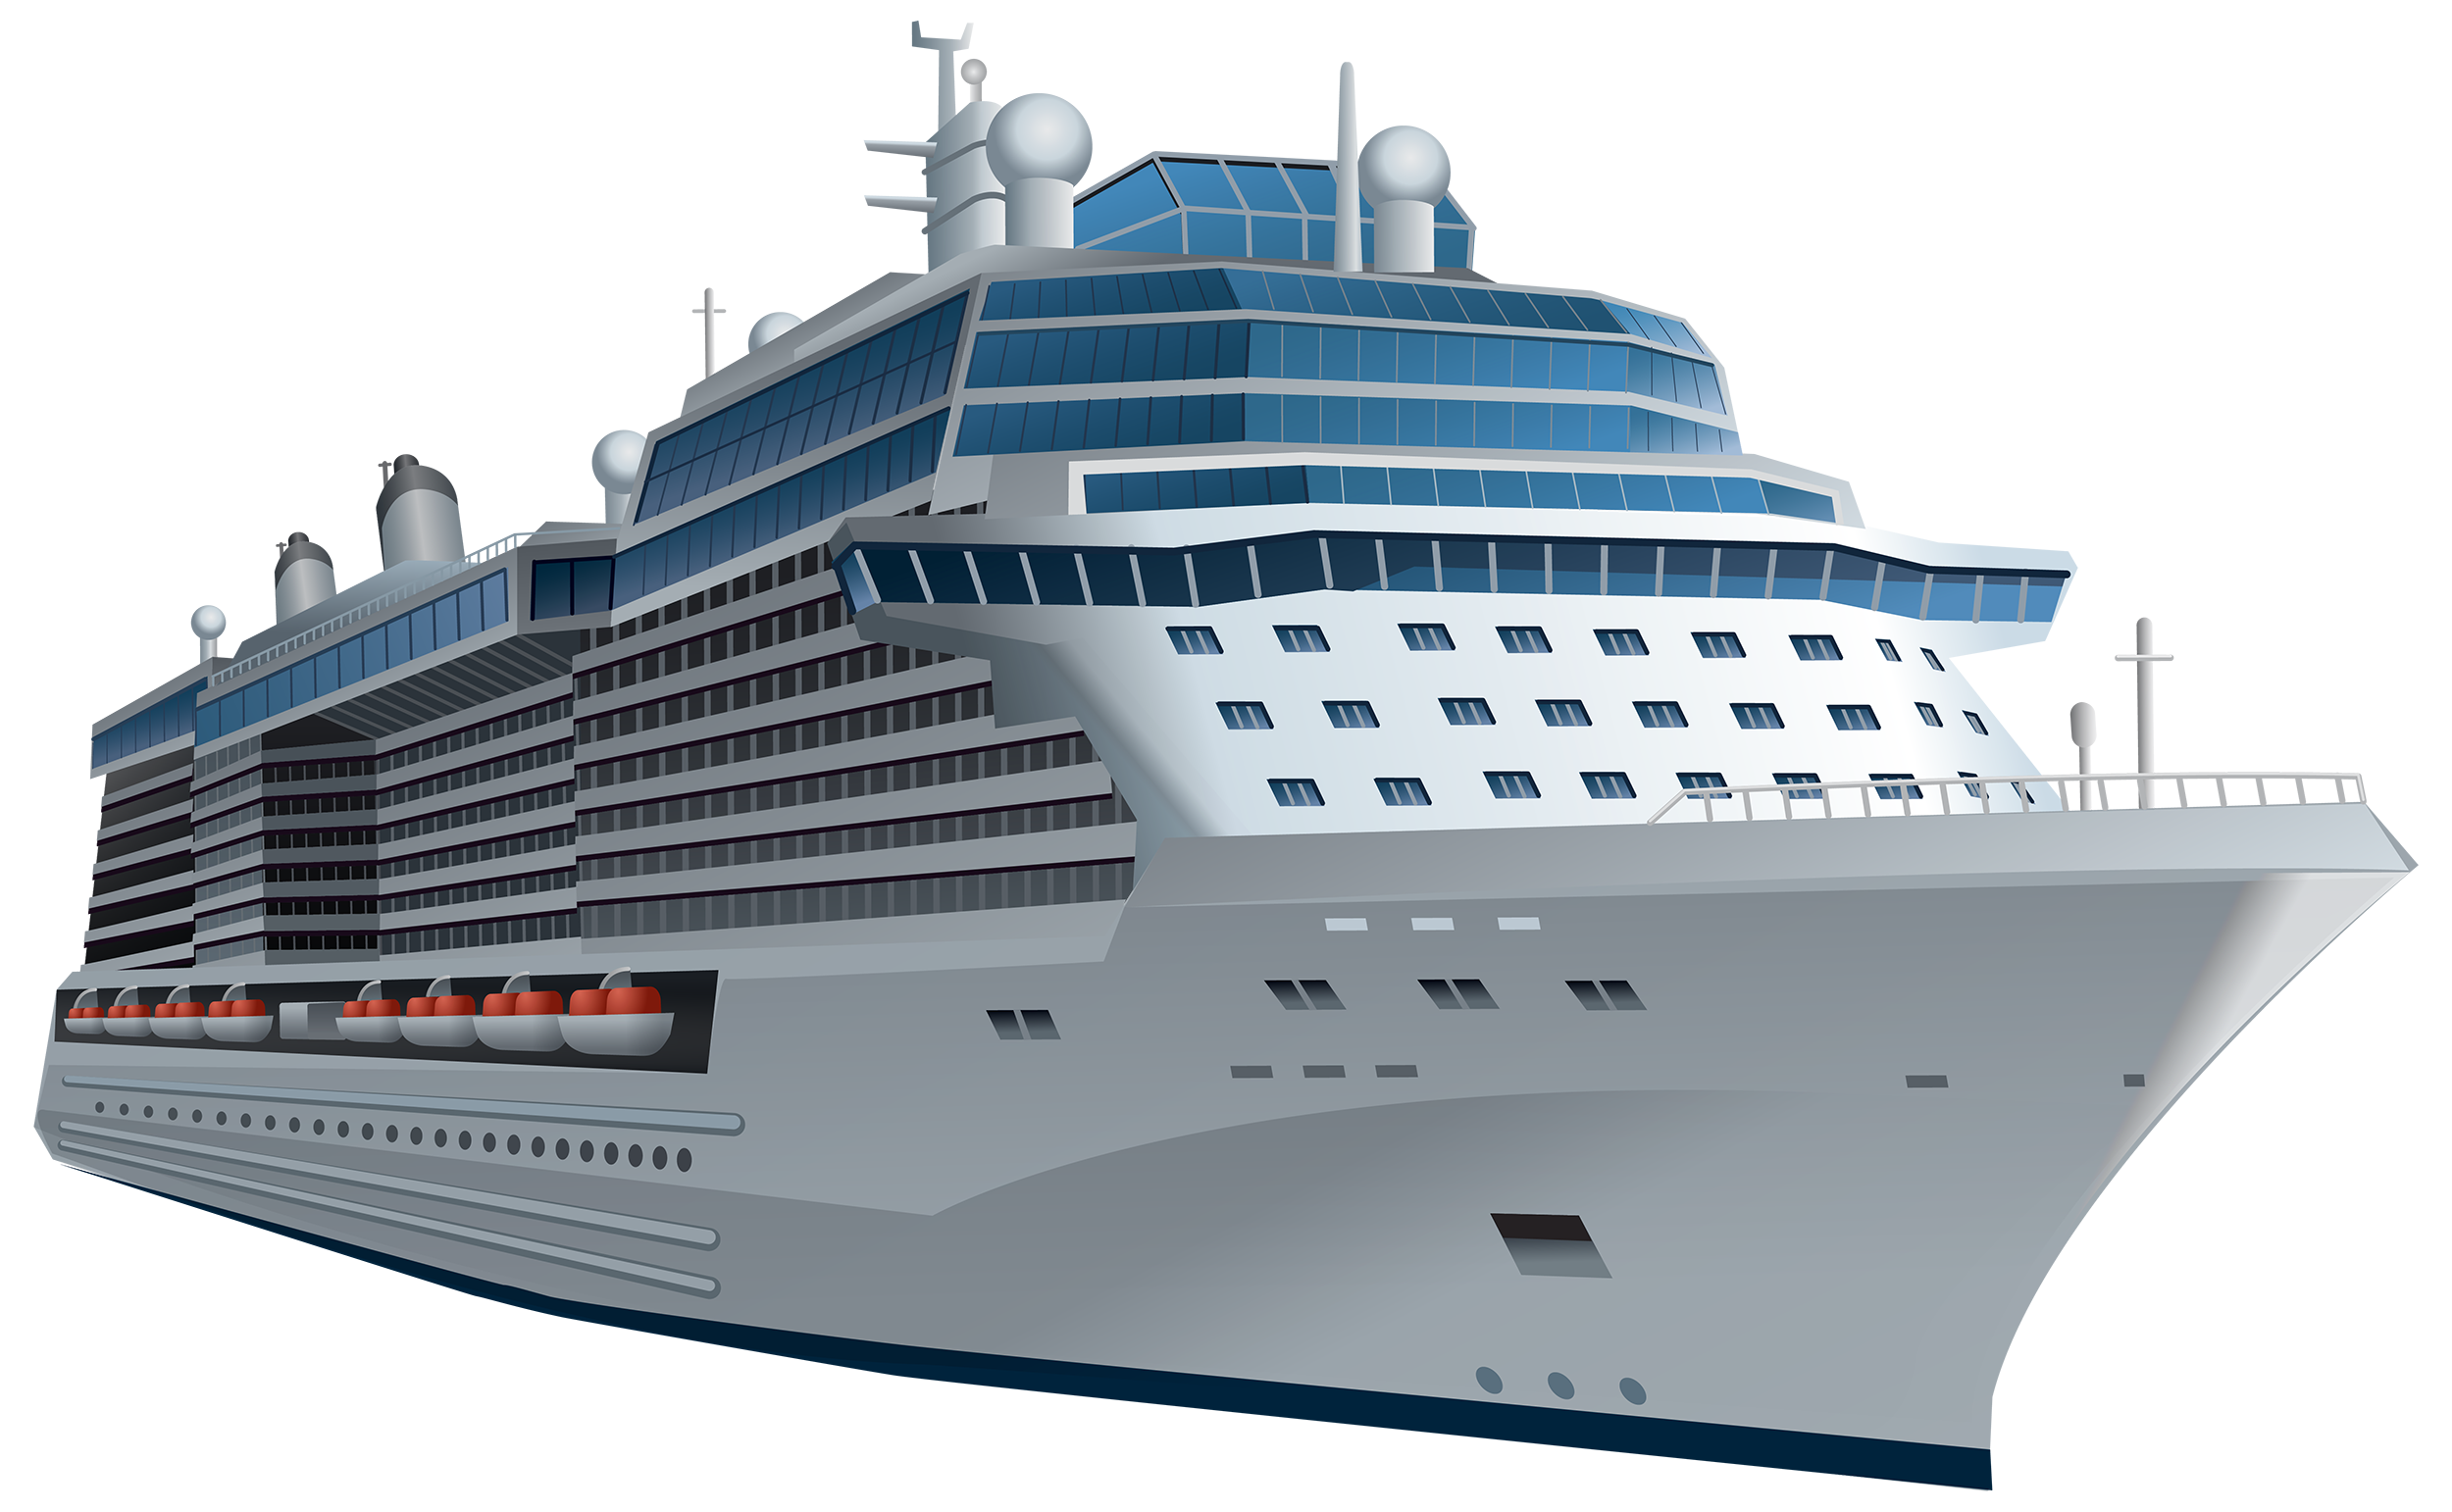 Luxury cruise ship clipart - Clipground